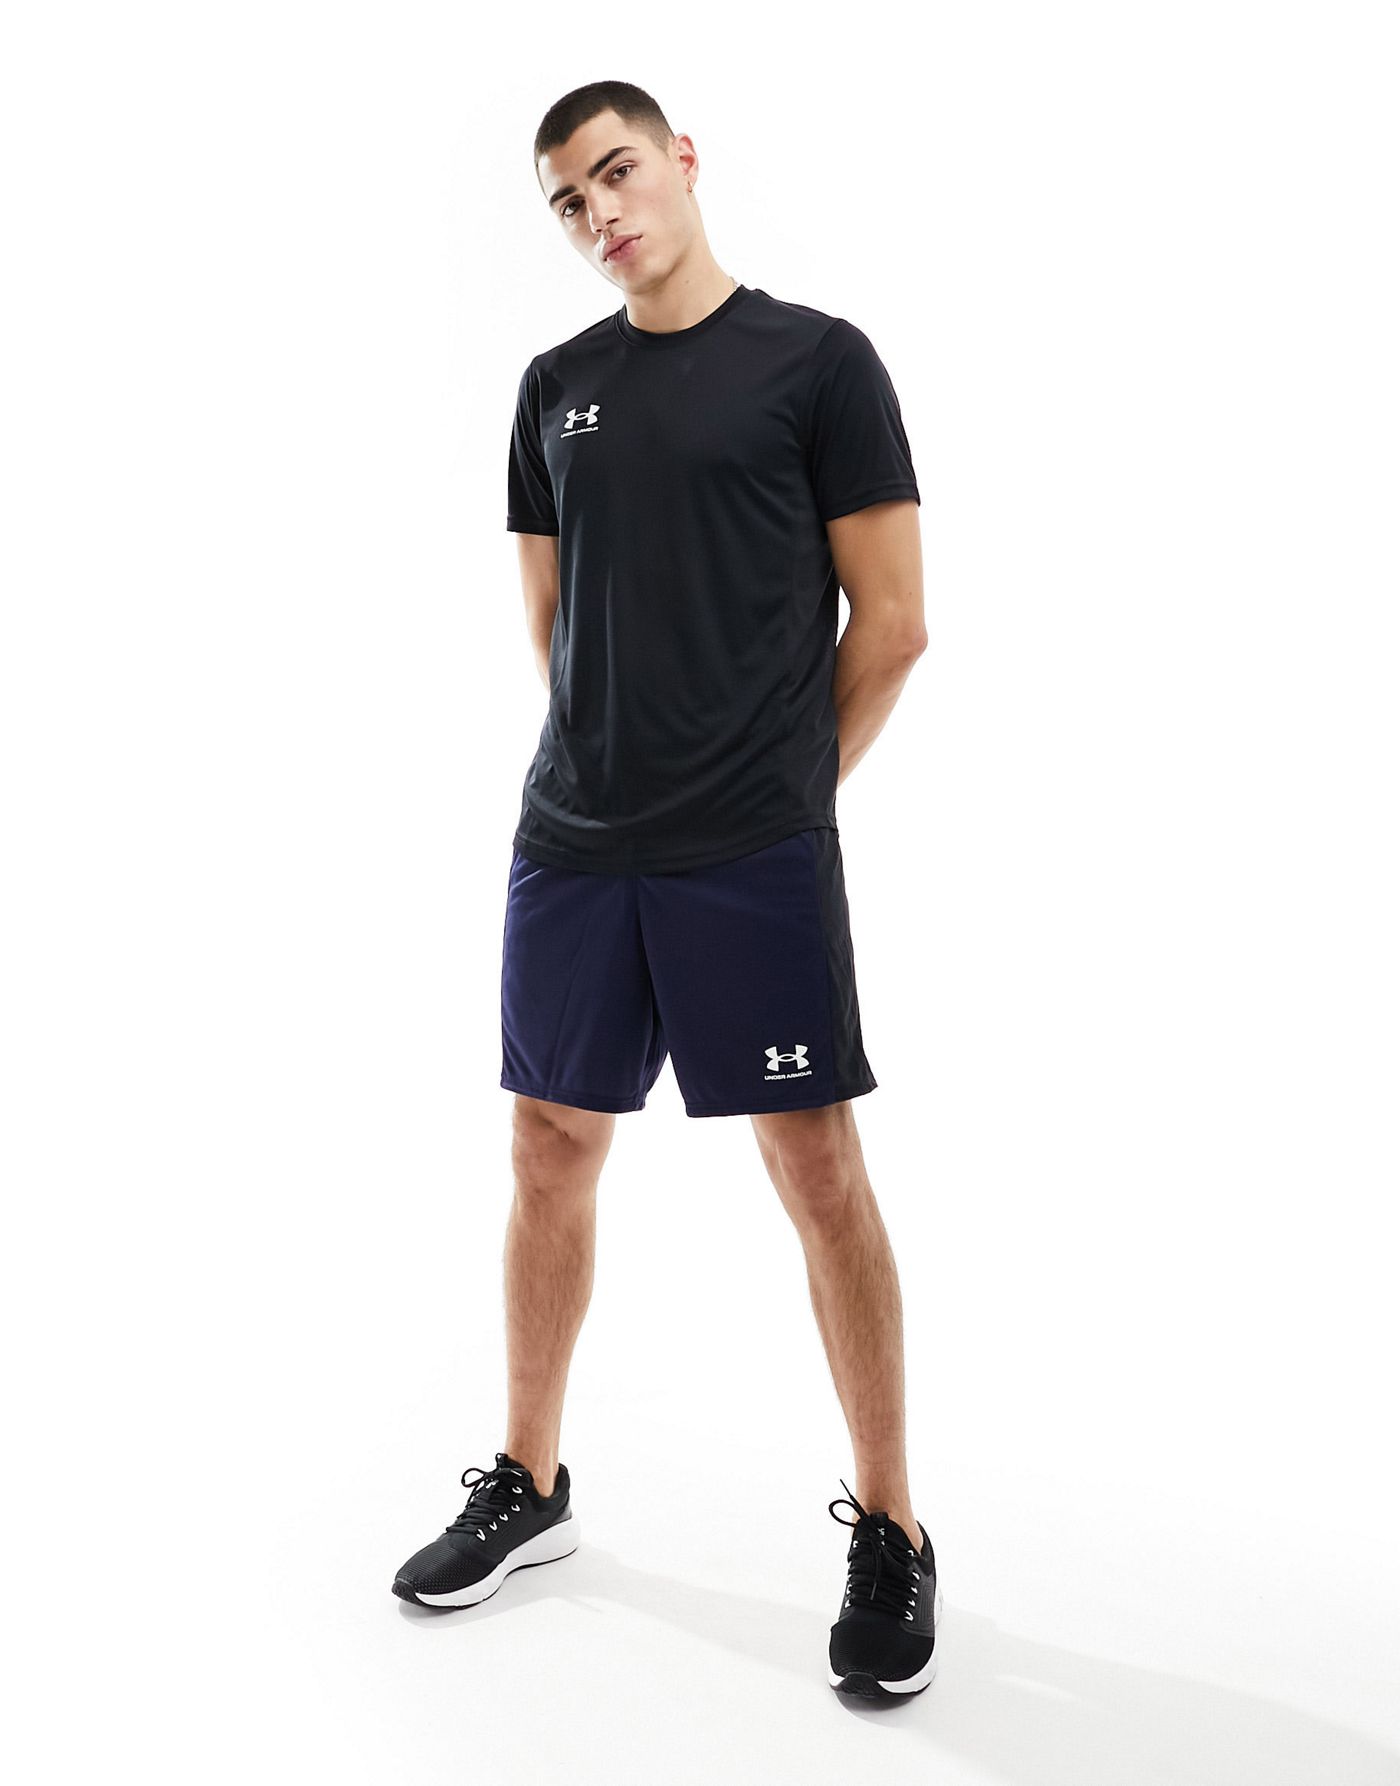 Under Armour Challenger Pro training t-shirt in black